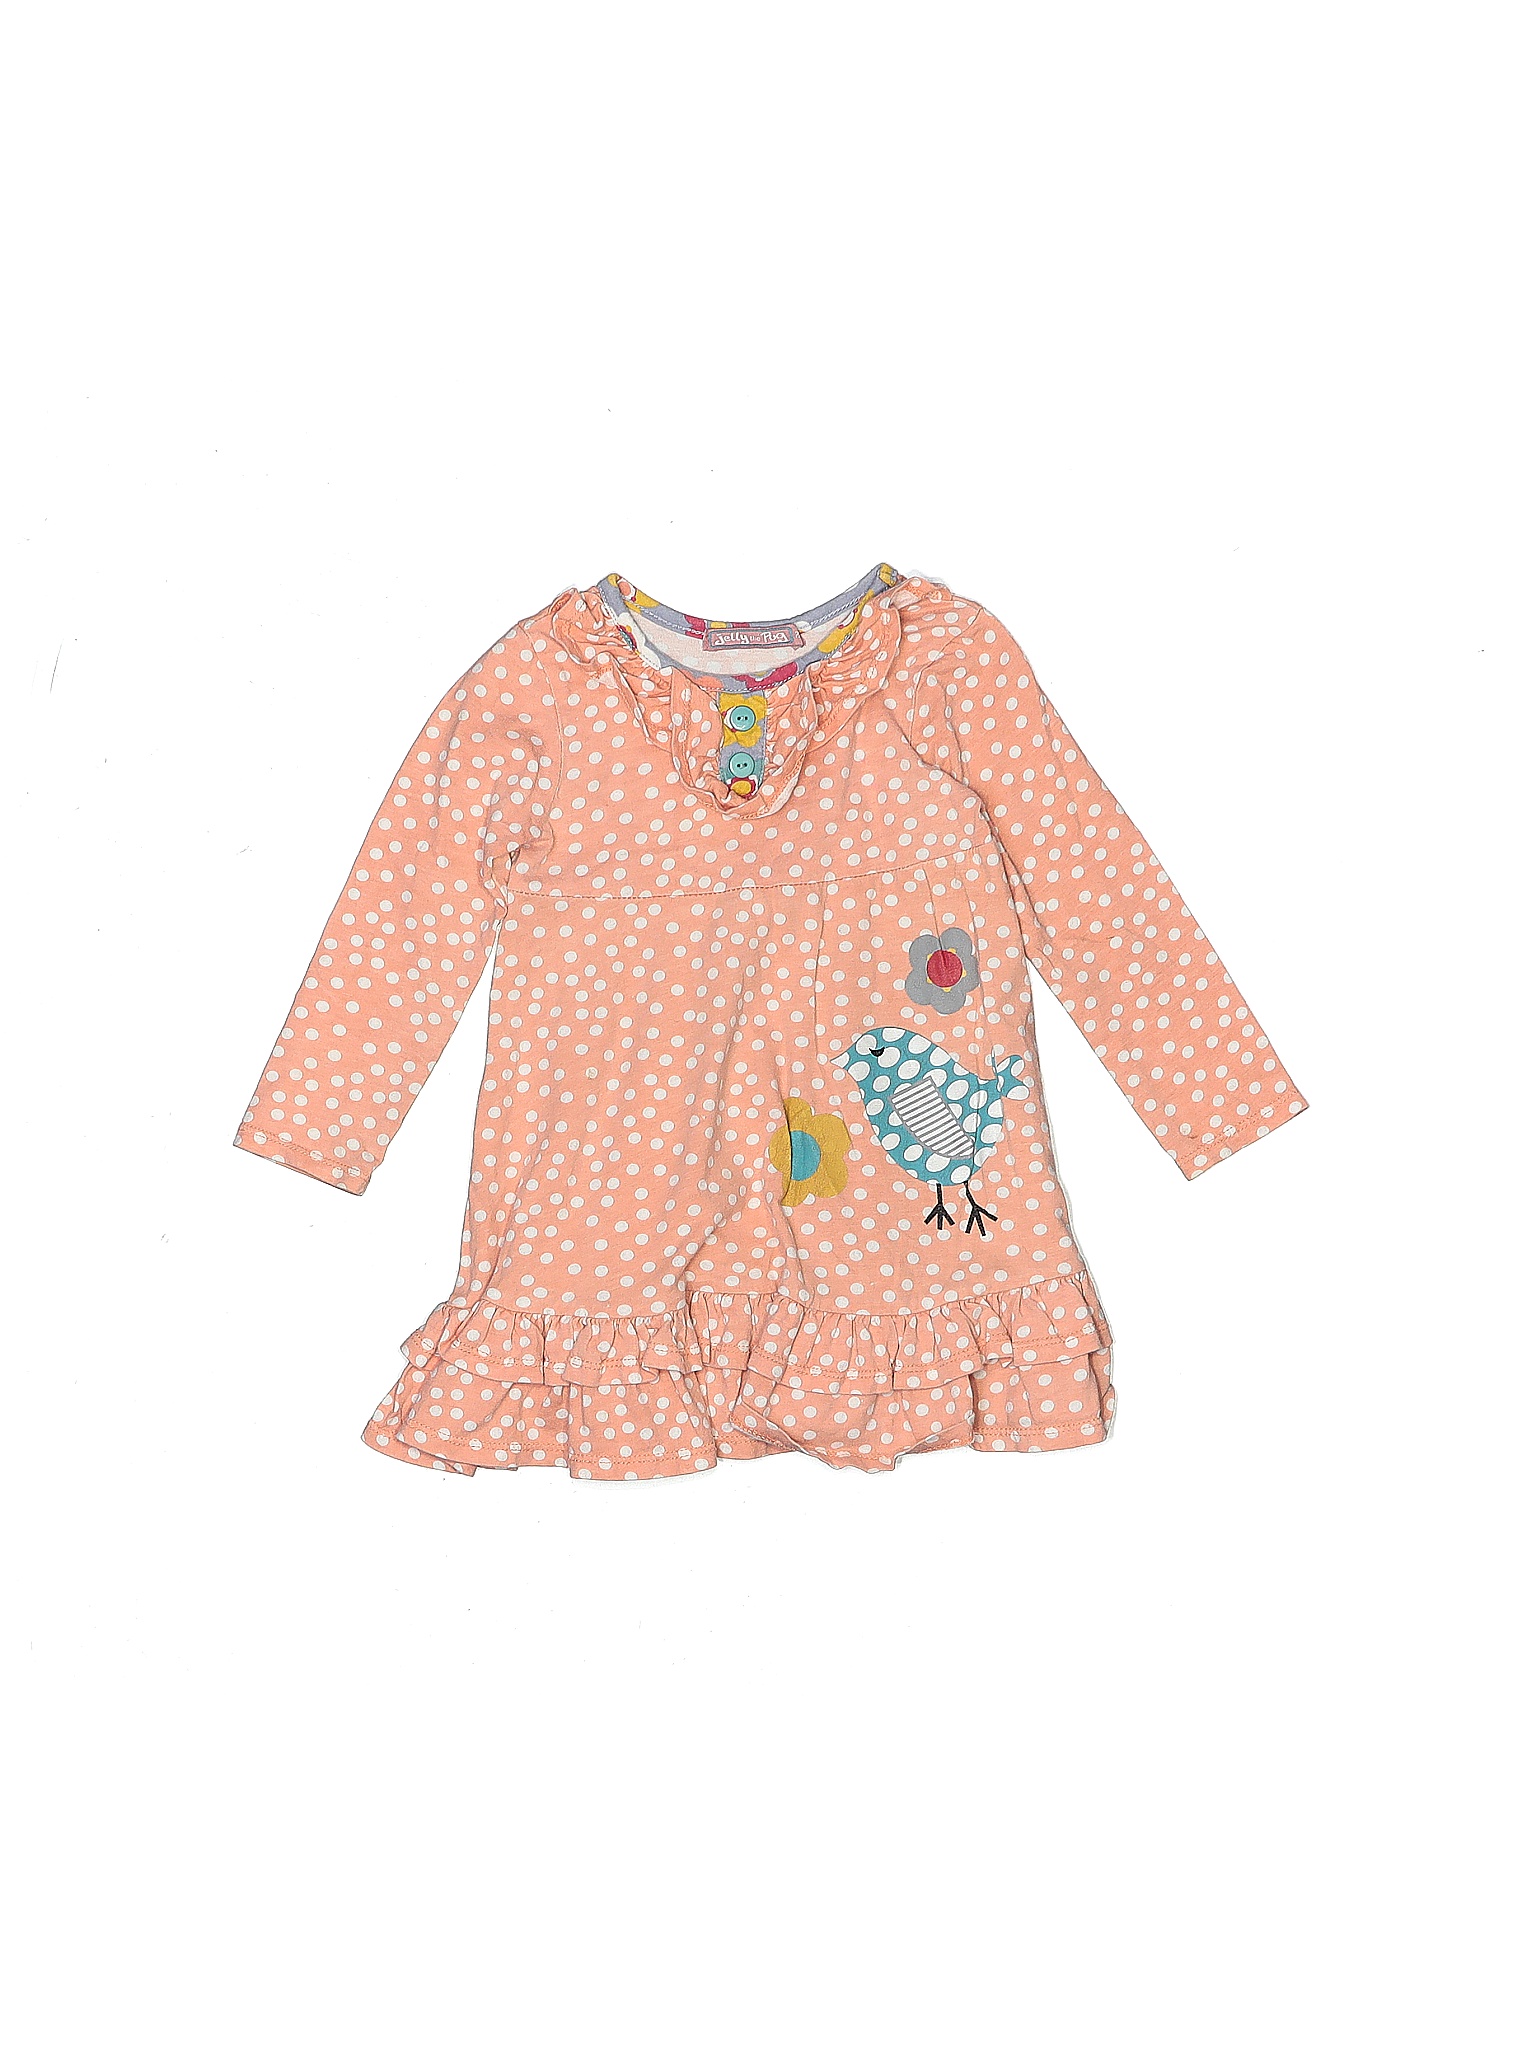 Jelly The Pug Girls' Clothing On Sale Up To 90% Off Retail | thredUP